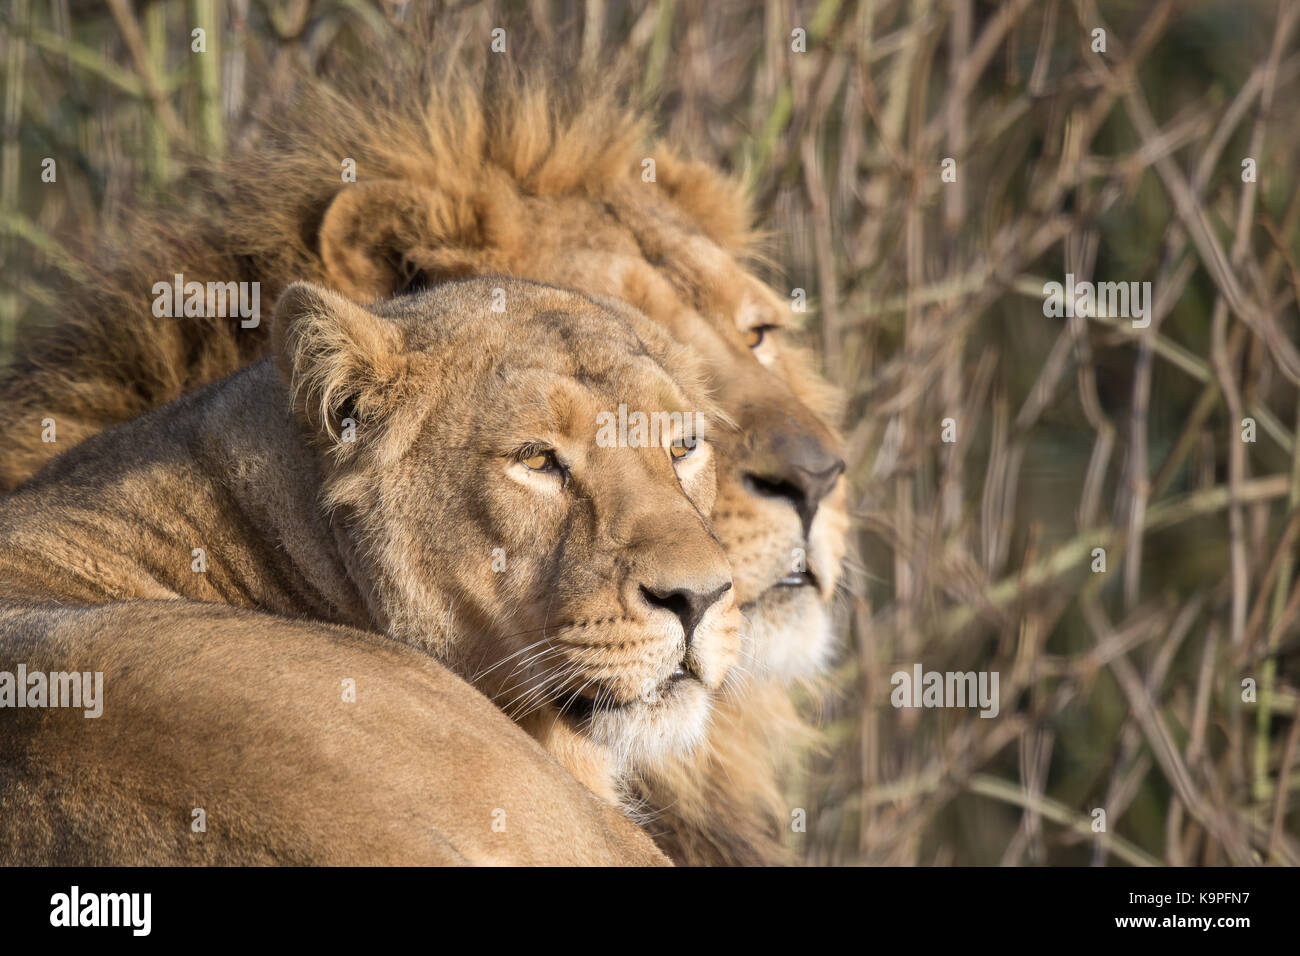 Close up Asiatic lions (Panthera leo persica) isolated outdoors relaxing in sunshine, Cotswold Wildlife Park UK. Lion & lioness together in captivity. Stock Photo